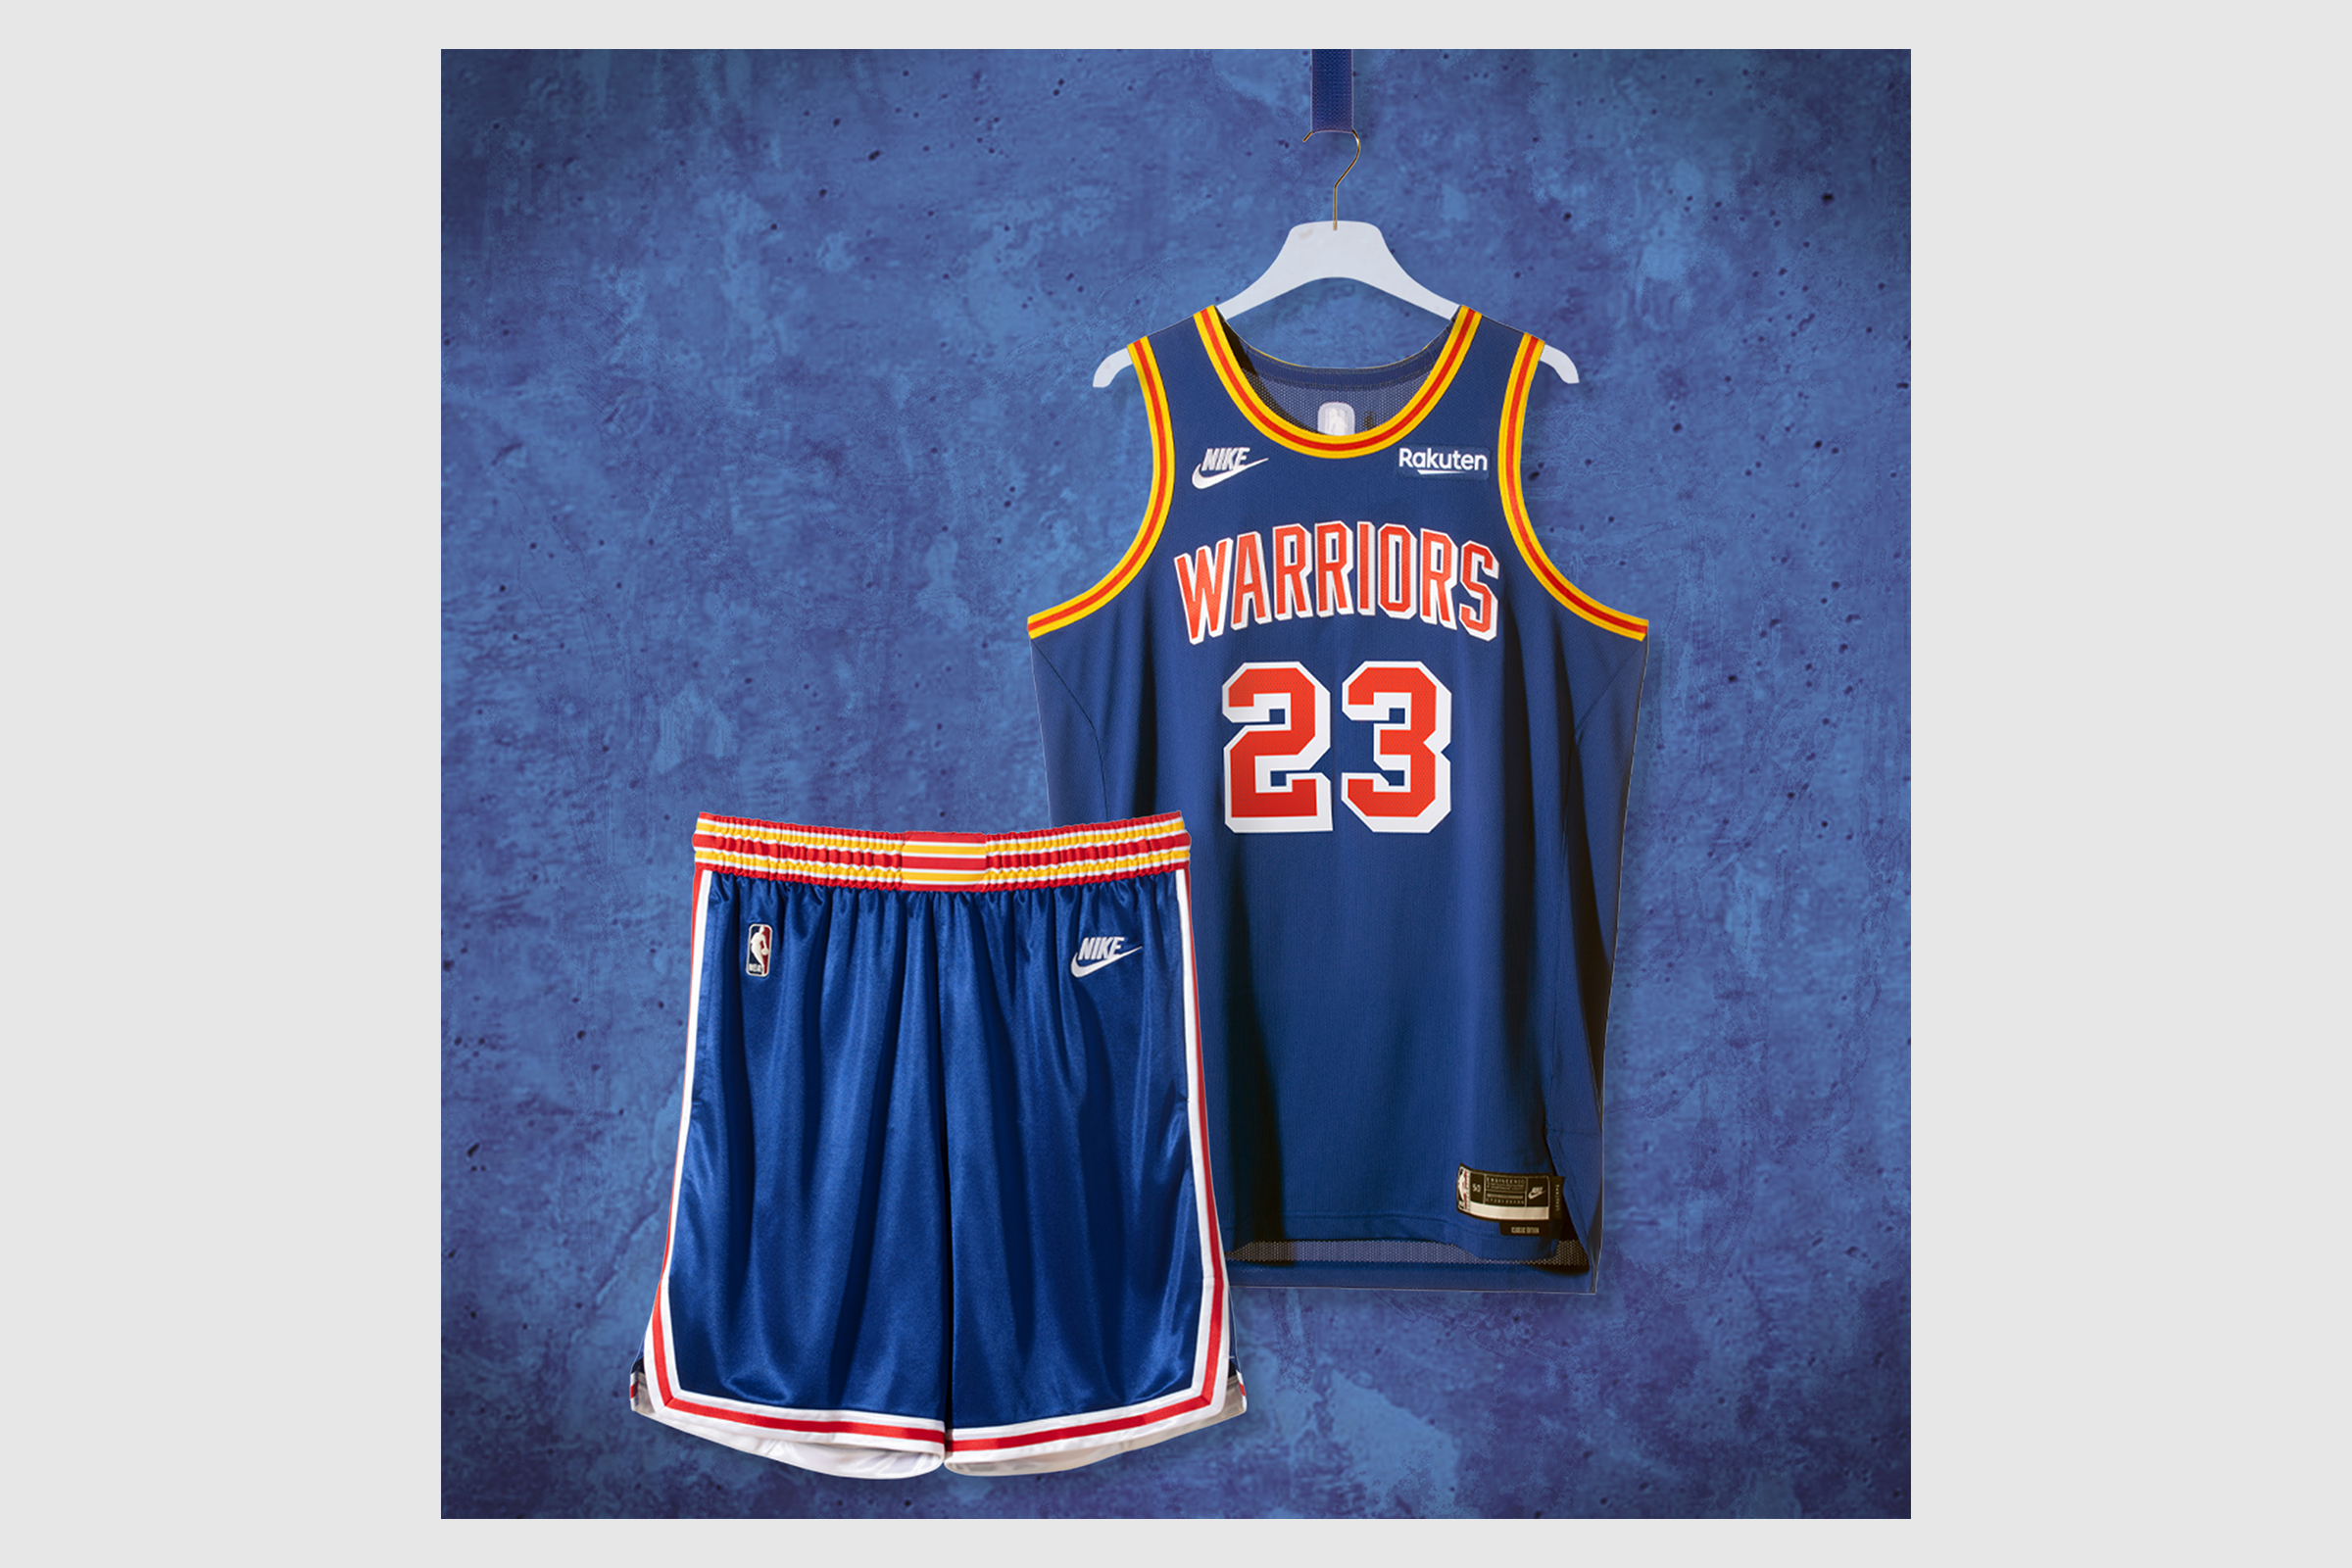 New York Knicks - Our Statement Jersey's are officially